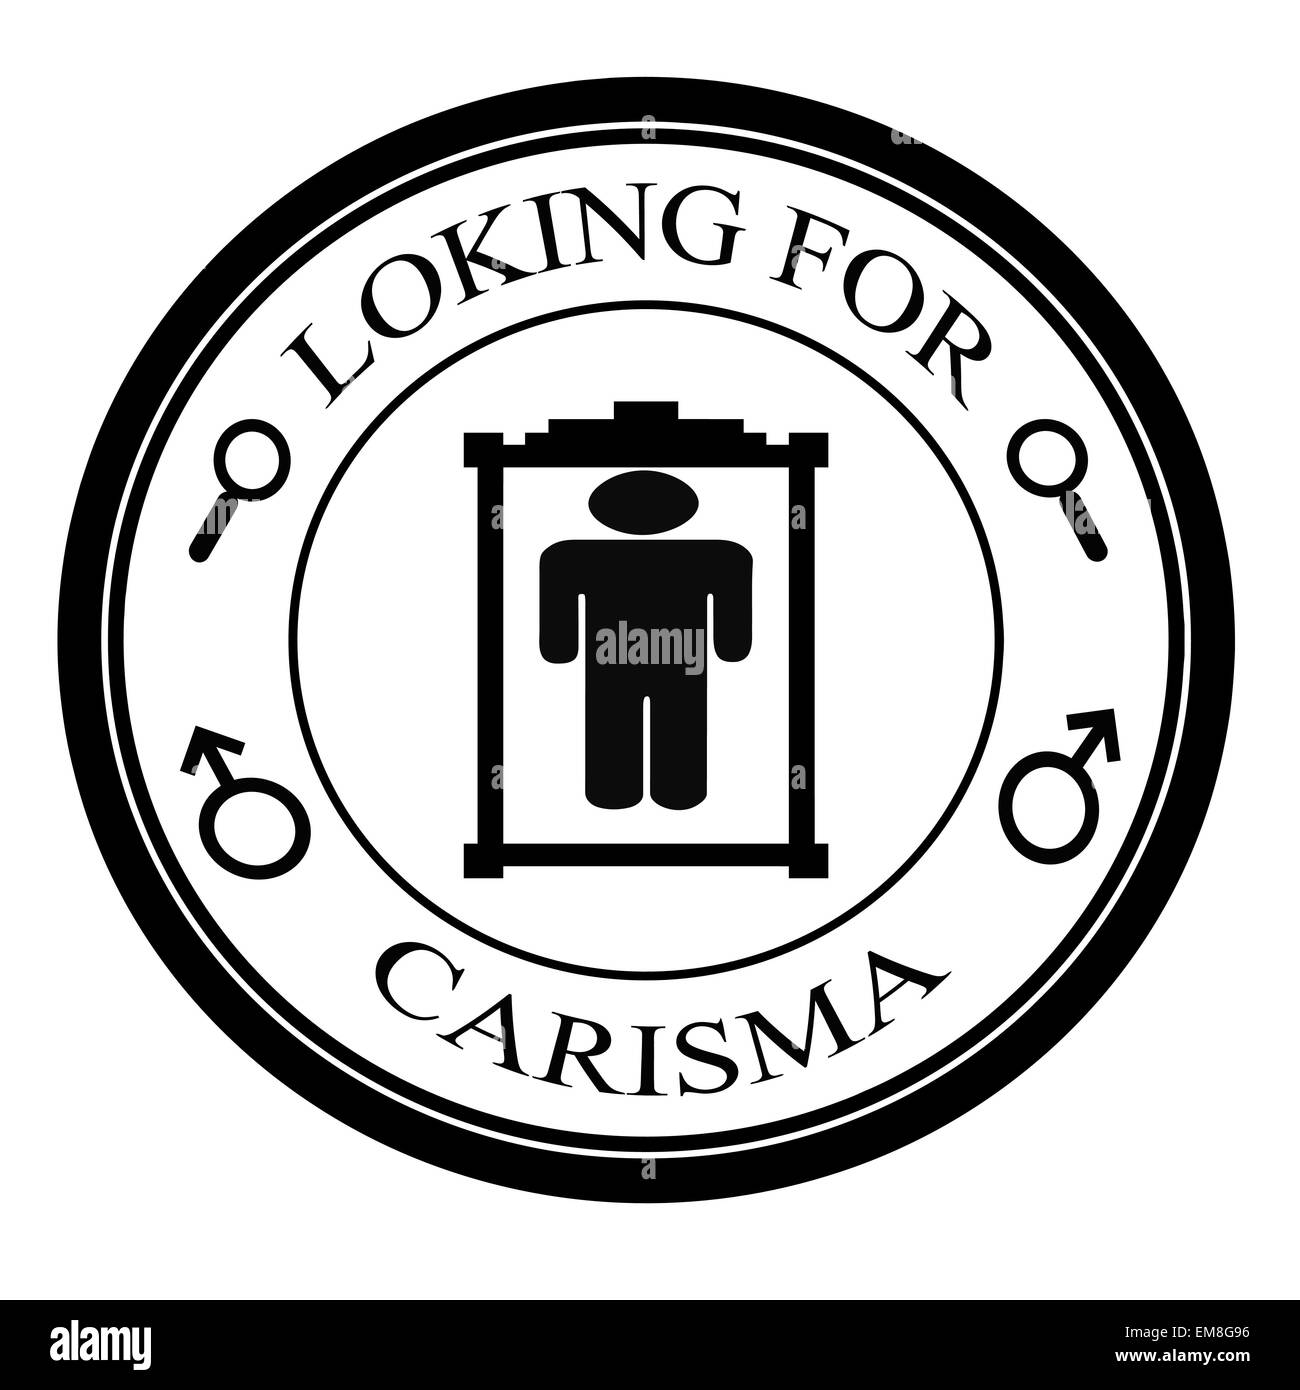 Looking for Charisma Stock Vector